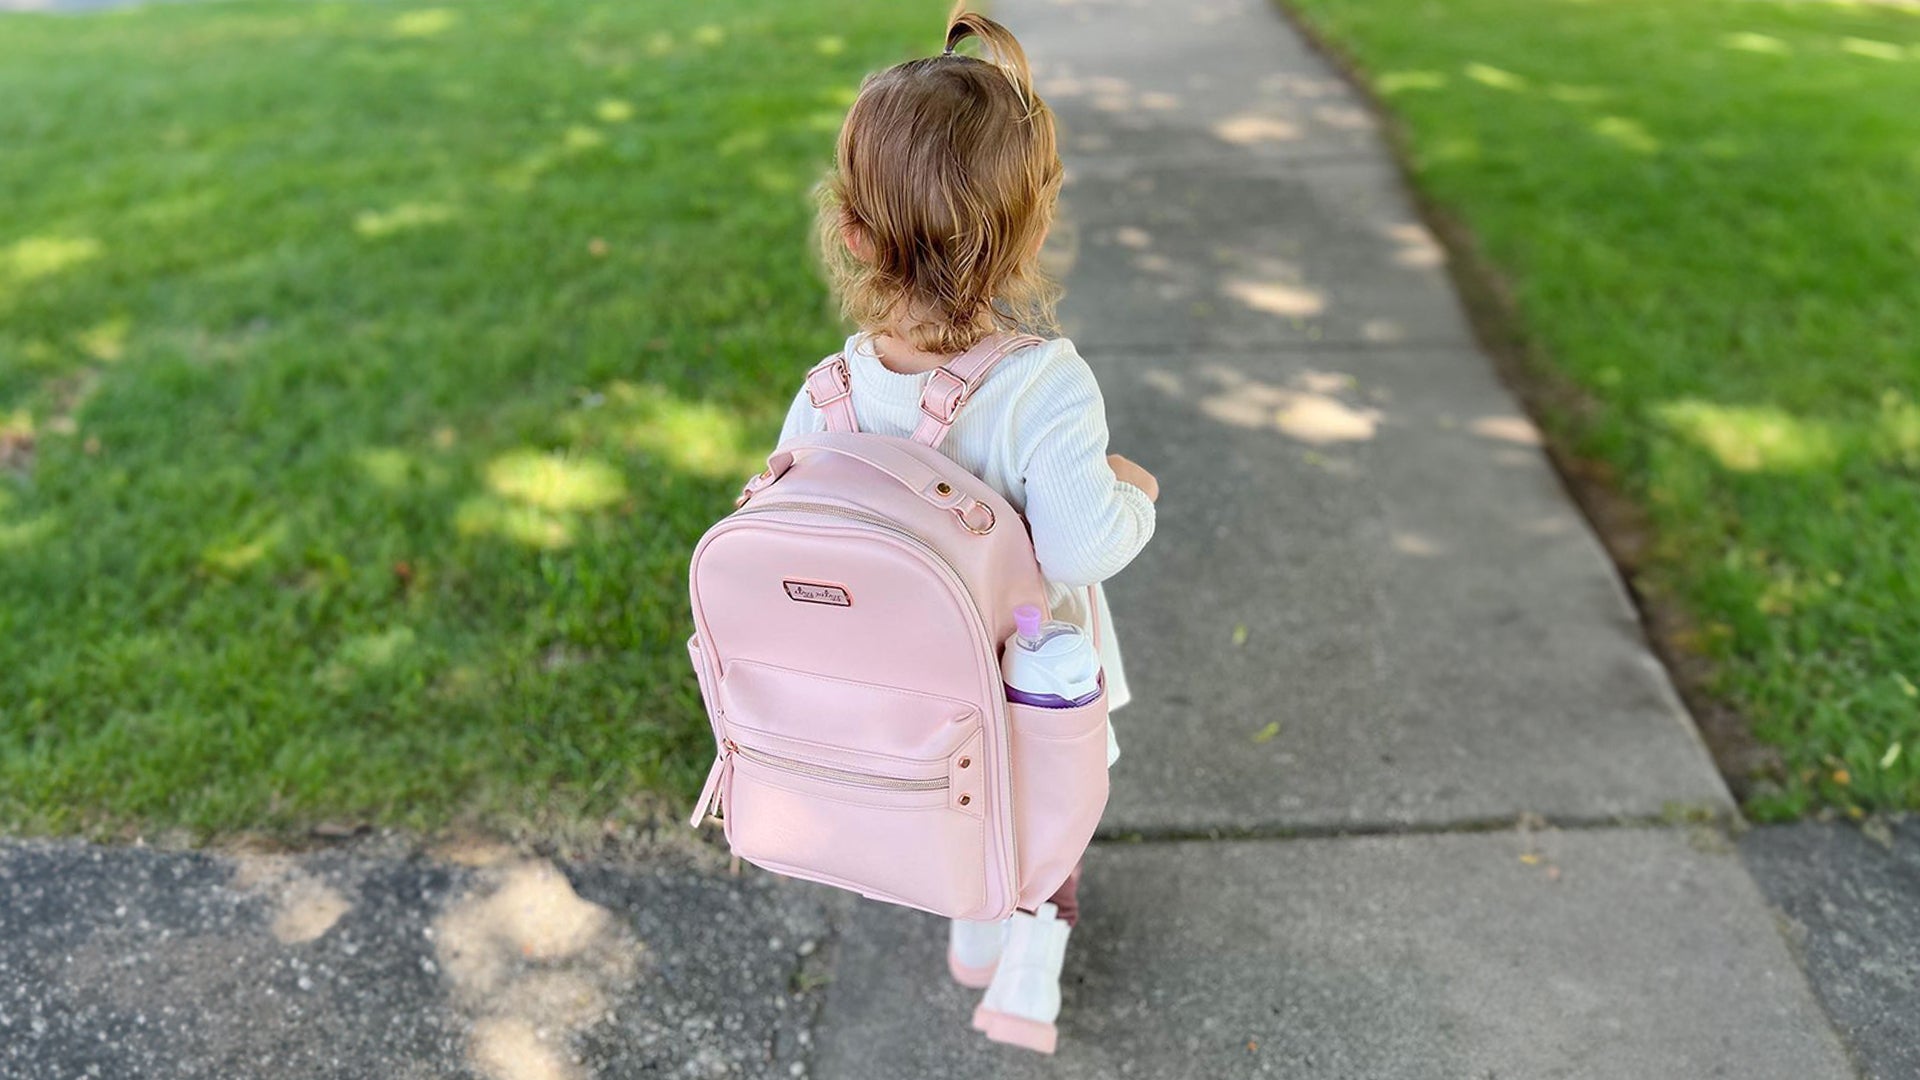 Itzy Ritzy Mini Diaper Bag in Blush color worn by a toddler on her back